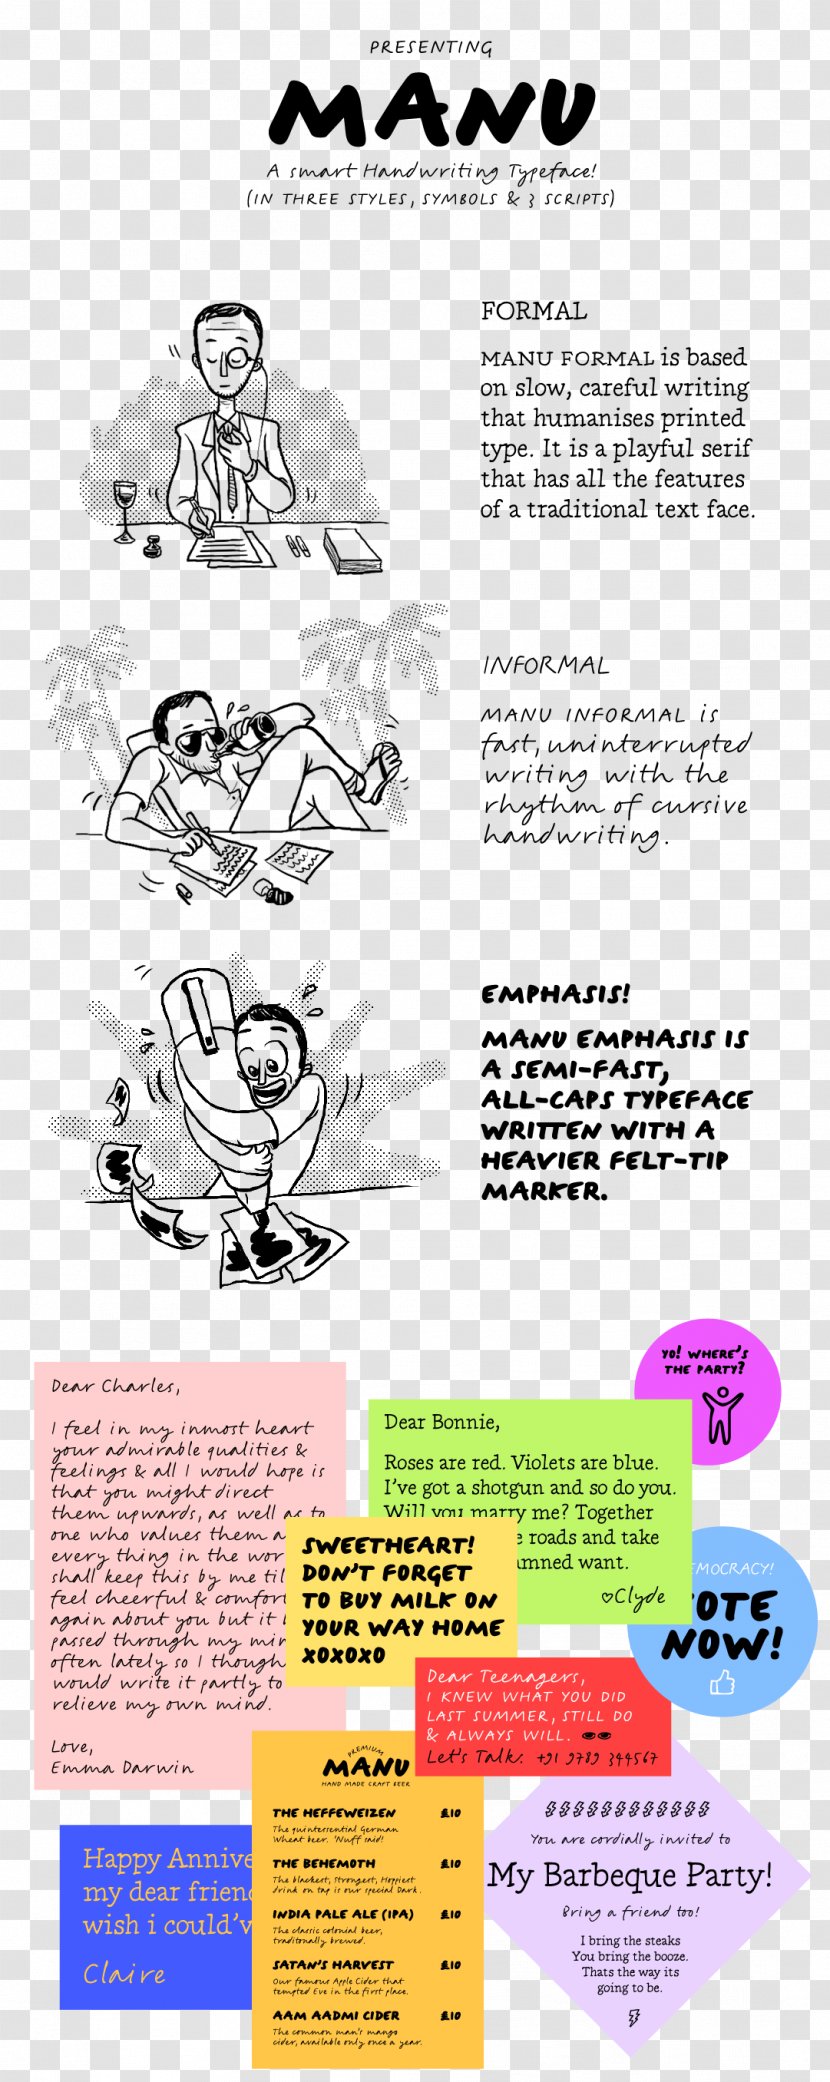 Paper Handwriting Critical Thinking Information - Apa Style - Eric Cantona Transparent PNG